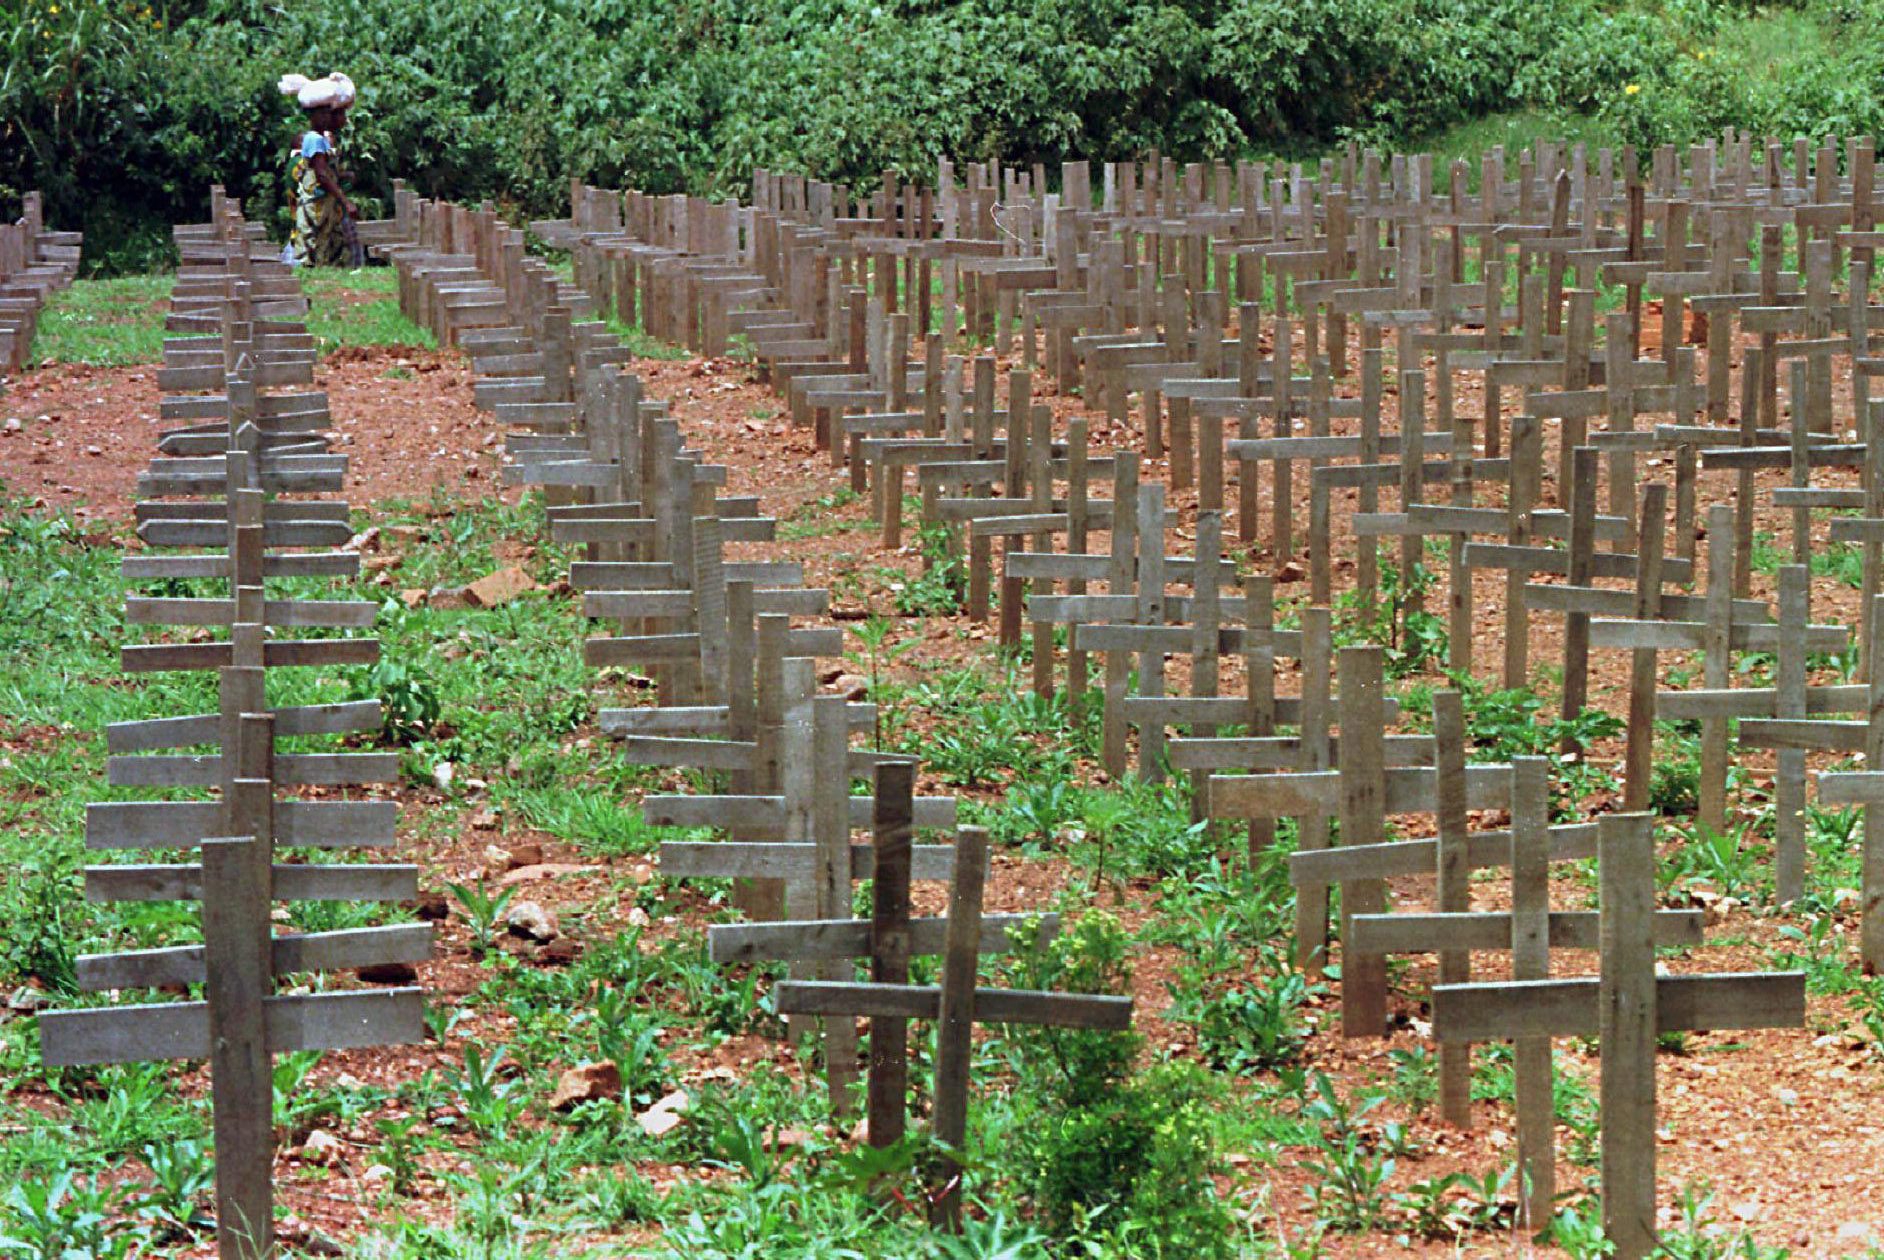 FILE - In this Dec. 1, 1996 file photo, rows of crosses mark a mass burial site of victims of the 1994 genocide near Kigali, Rwanda. A Rwandan man was found guilty Friday, May 22, 2009 of war crimes during his country's 1994 genocide, becoming the first person convicted under a new Canadian law that allows residents to be tried for crimes committed abroad. Desire Munyaneza, 42, faces a possible life sentence. He was found guilty of all seven charges against him that include genocide, crimes against humanity and war crimes for his alleged role in the rape and slaughter of at least 500,000 Tutsis and moderate Hutus in Rwanda. (AP Photo/The Canadian Press, Paul Chiasson, File) RUANDA GENOZID ERINNERUNG